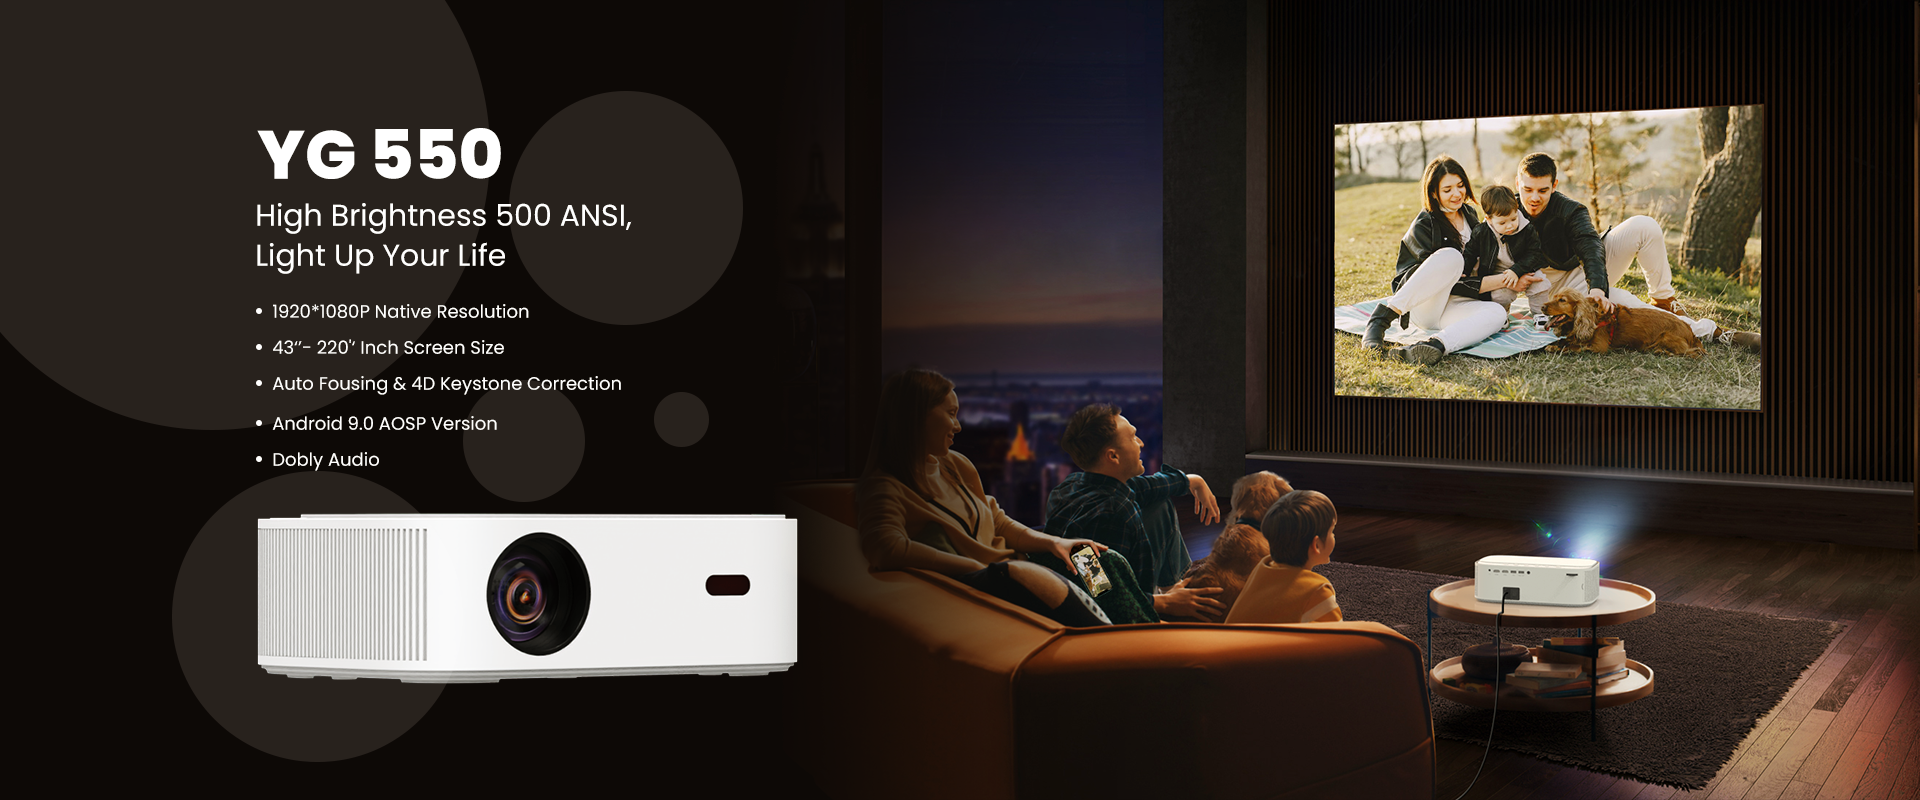 Mobile Video Projector